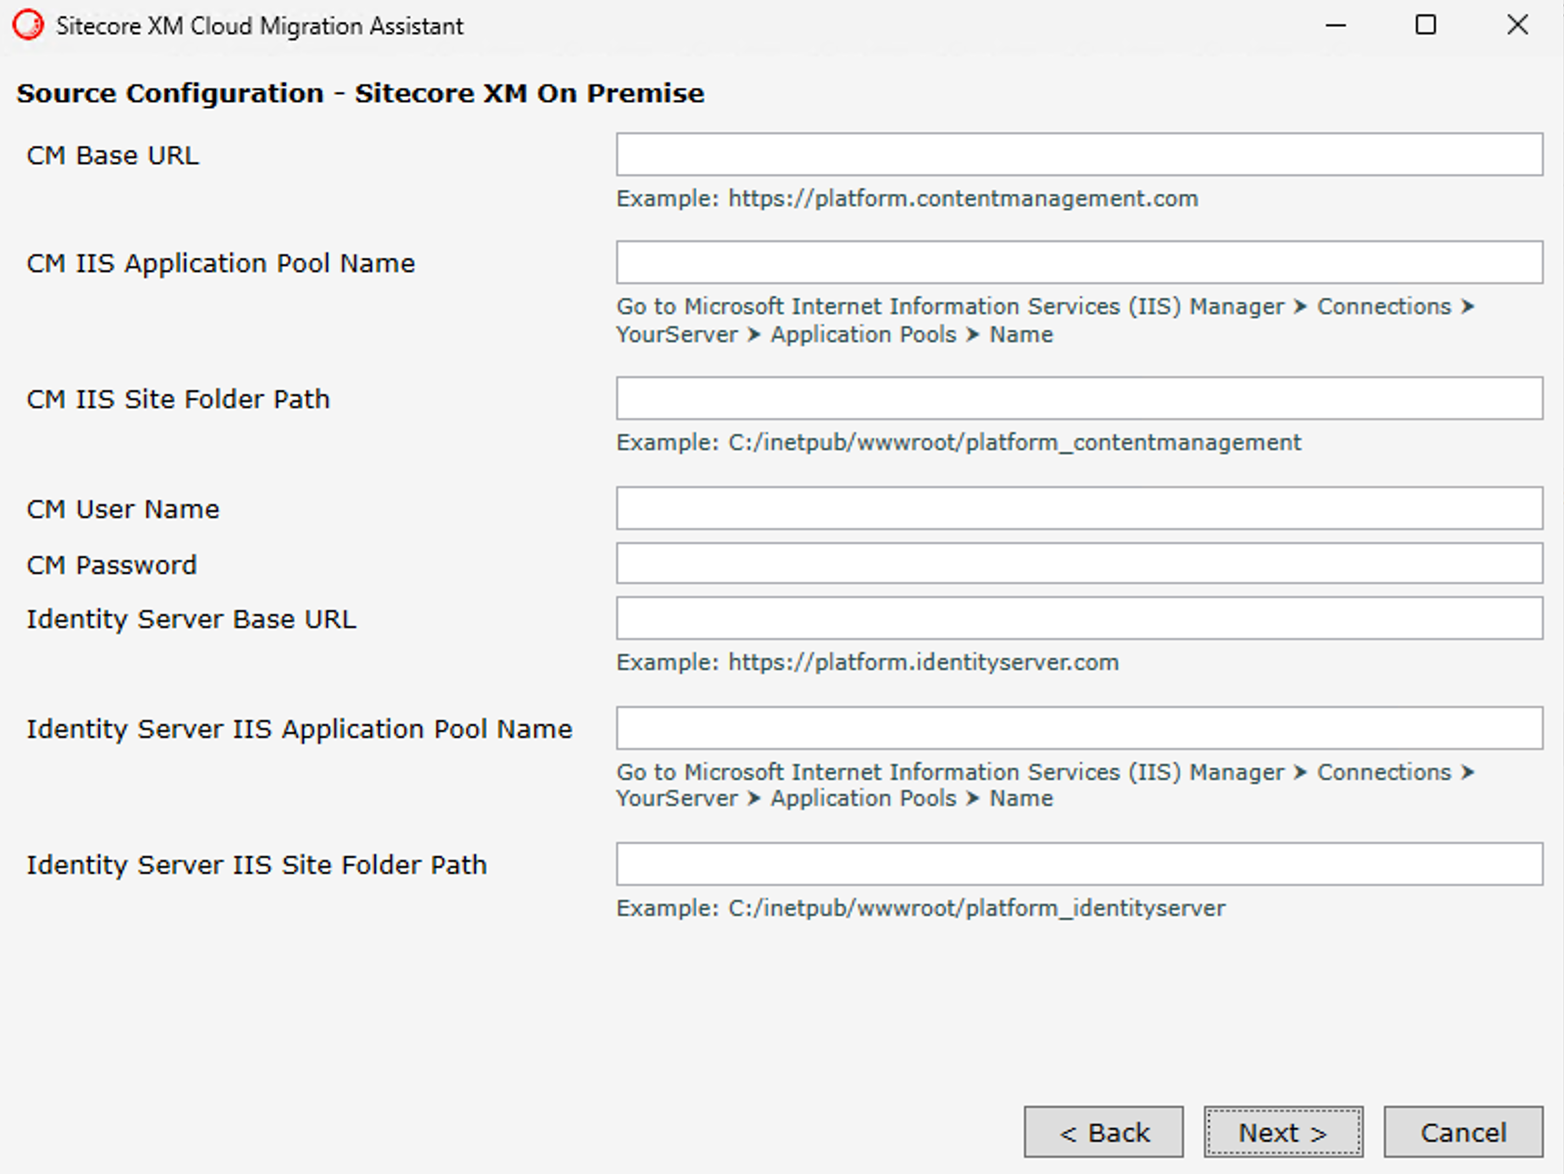 Configuration screen for migrating to Sitecore XM Cloud showing fields for environment details.